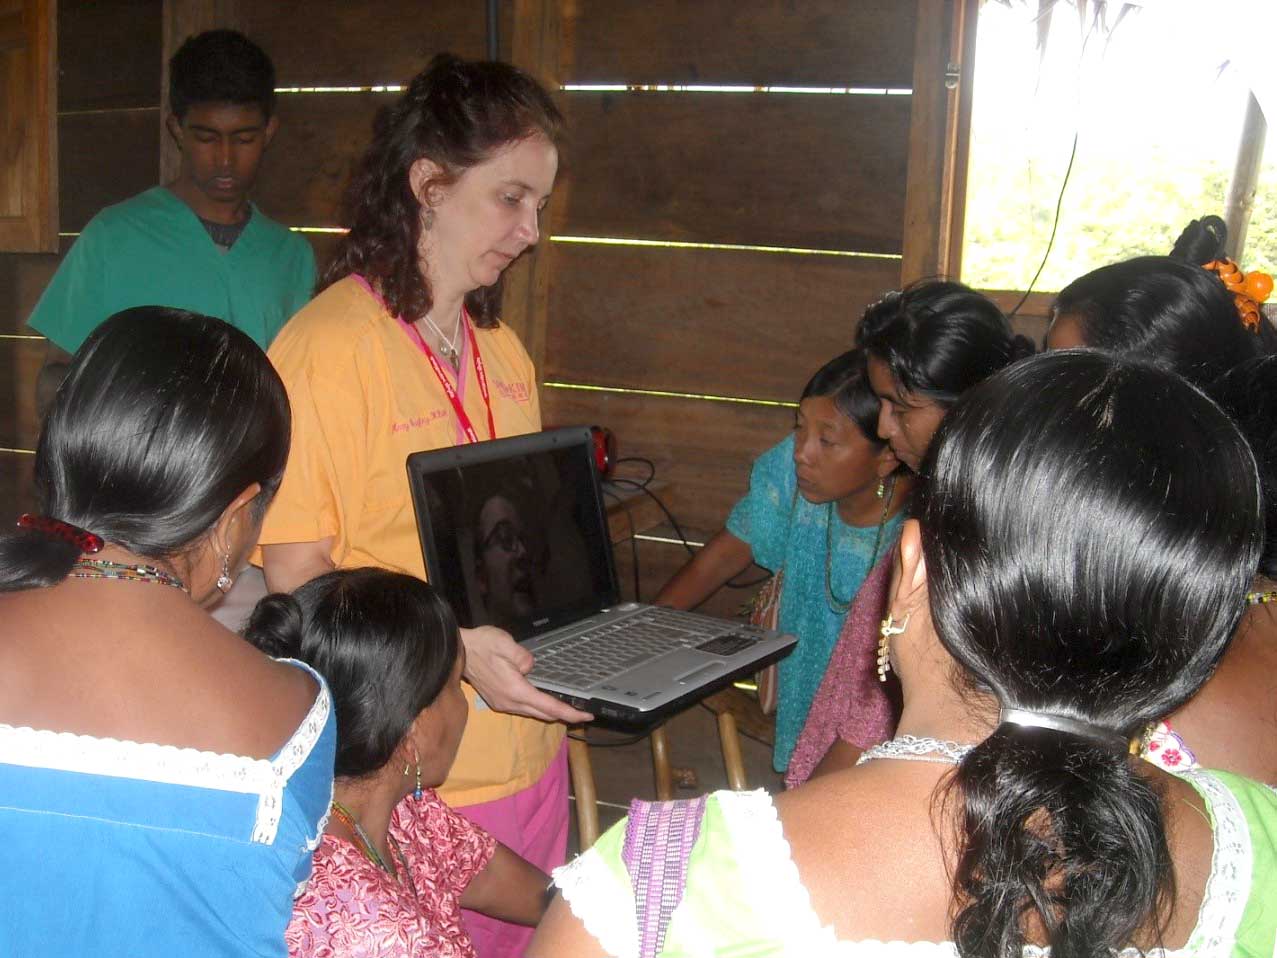 Kimberly and students gather around a laptop